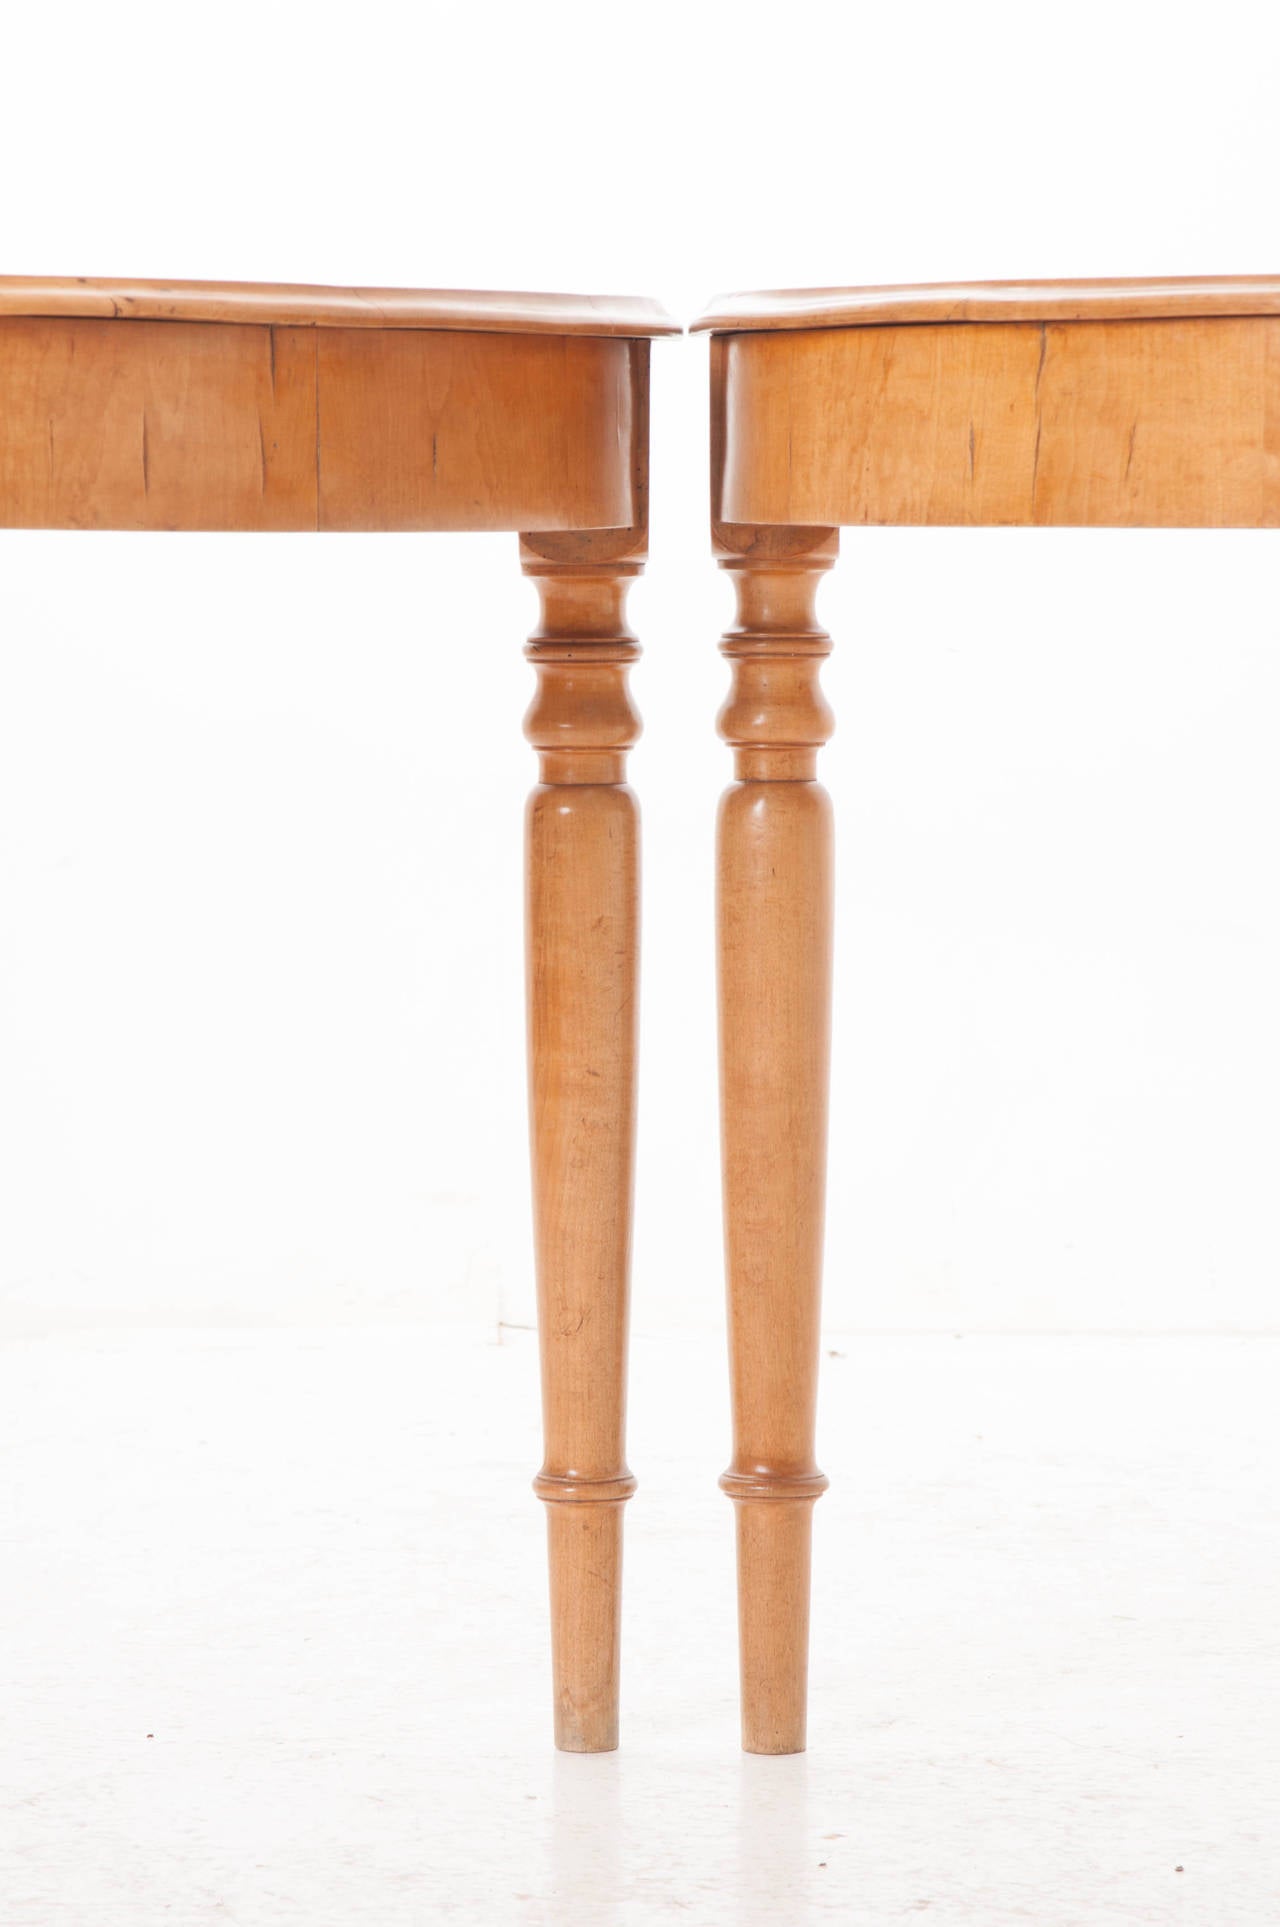 A great pair of Swedish demilune satin birch console tables. This fine pair can be used in many ways. Pull them together to make a small round table seating four or use as console tables in any room of your home. These consoles retain their